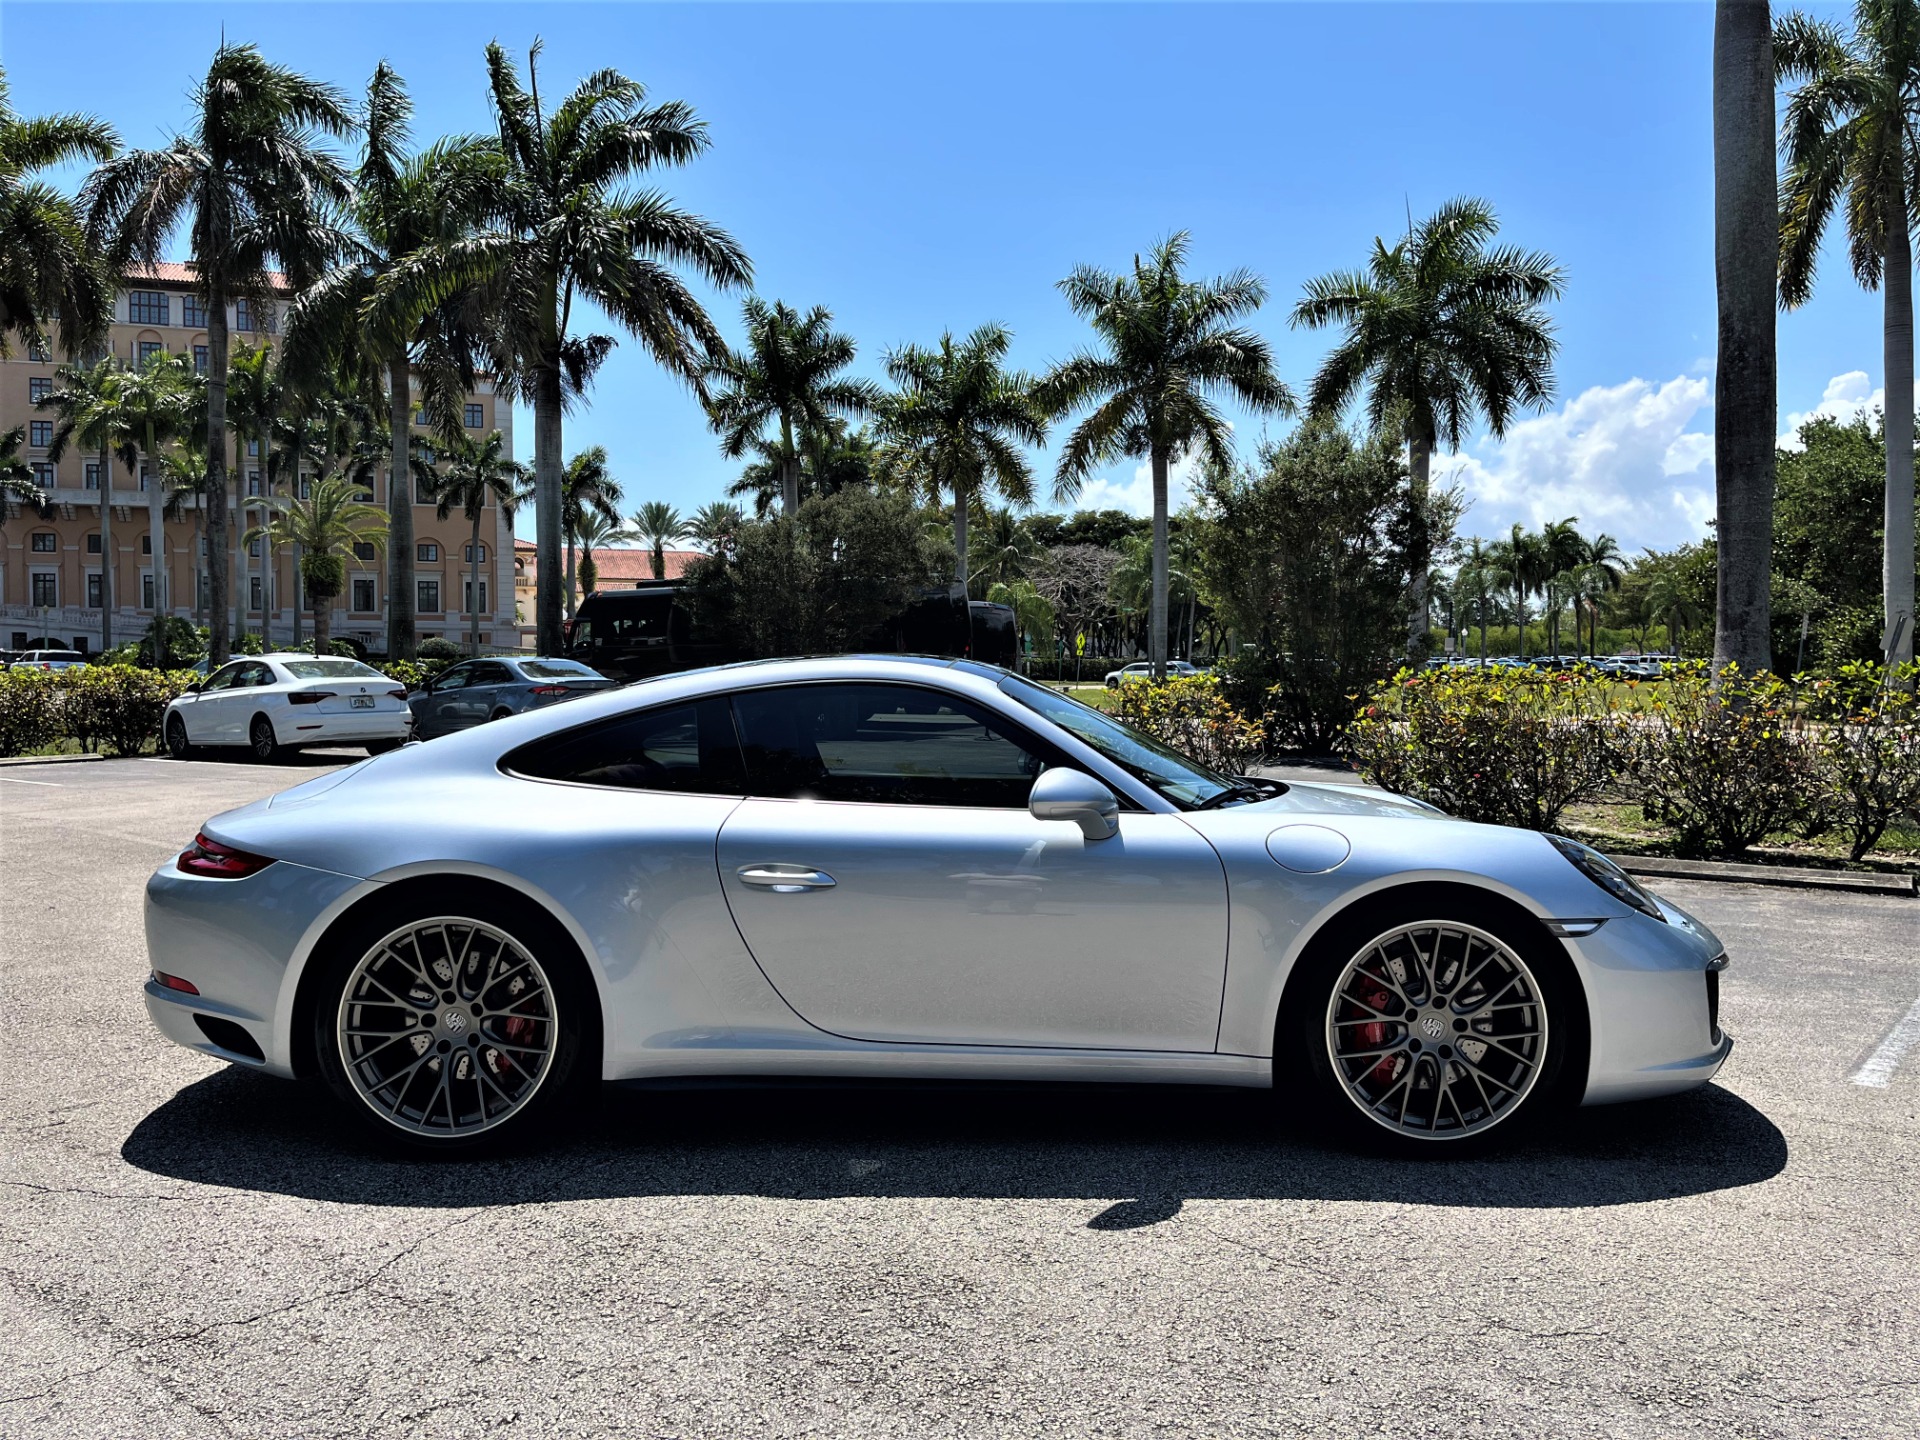 Used 2017 Porsche 911 Carrera 4S for sale Sold at The Gables Sports Cars in Miami FL 33146 3